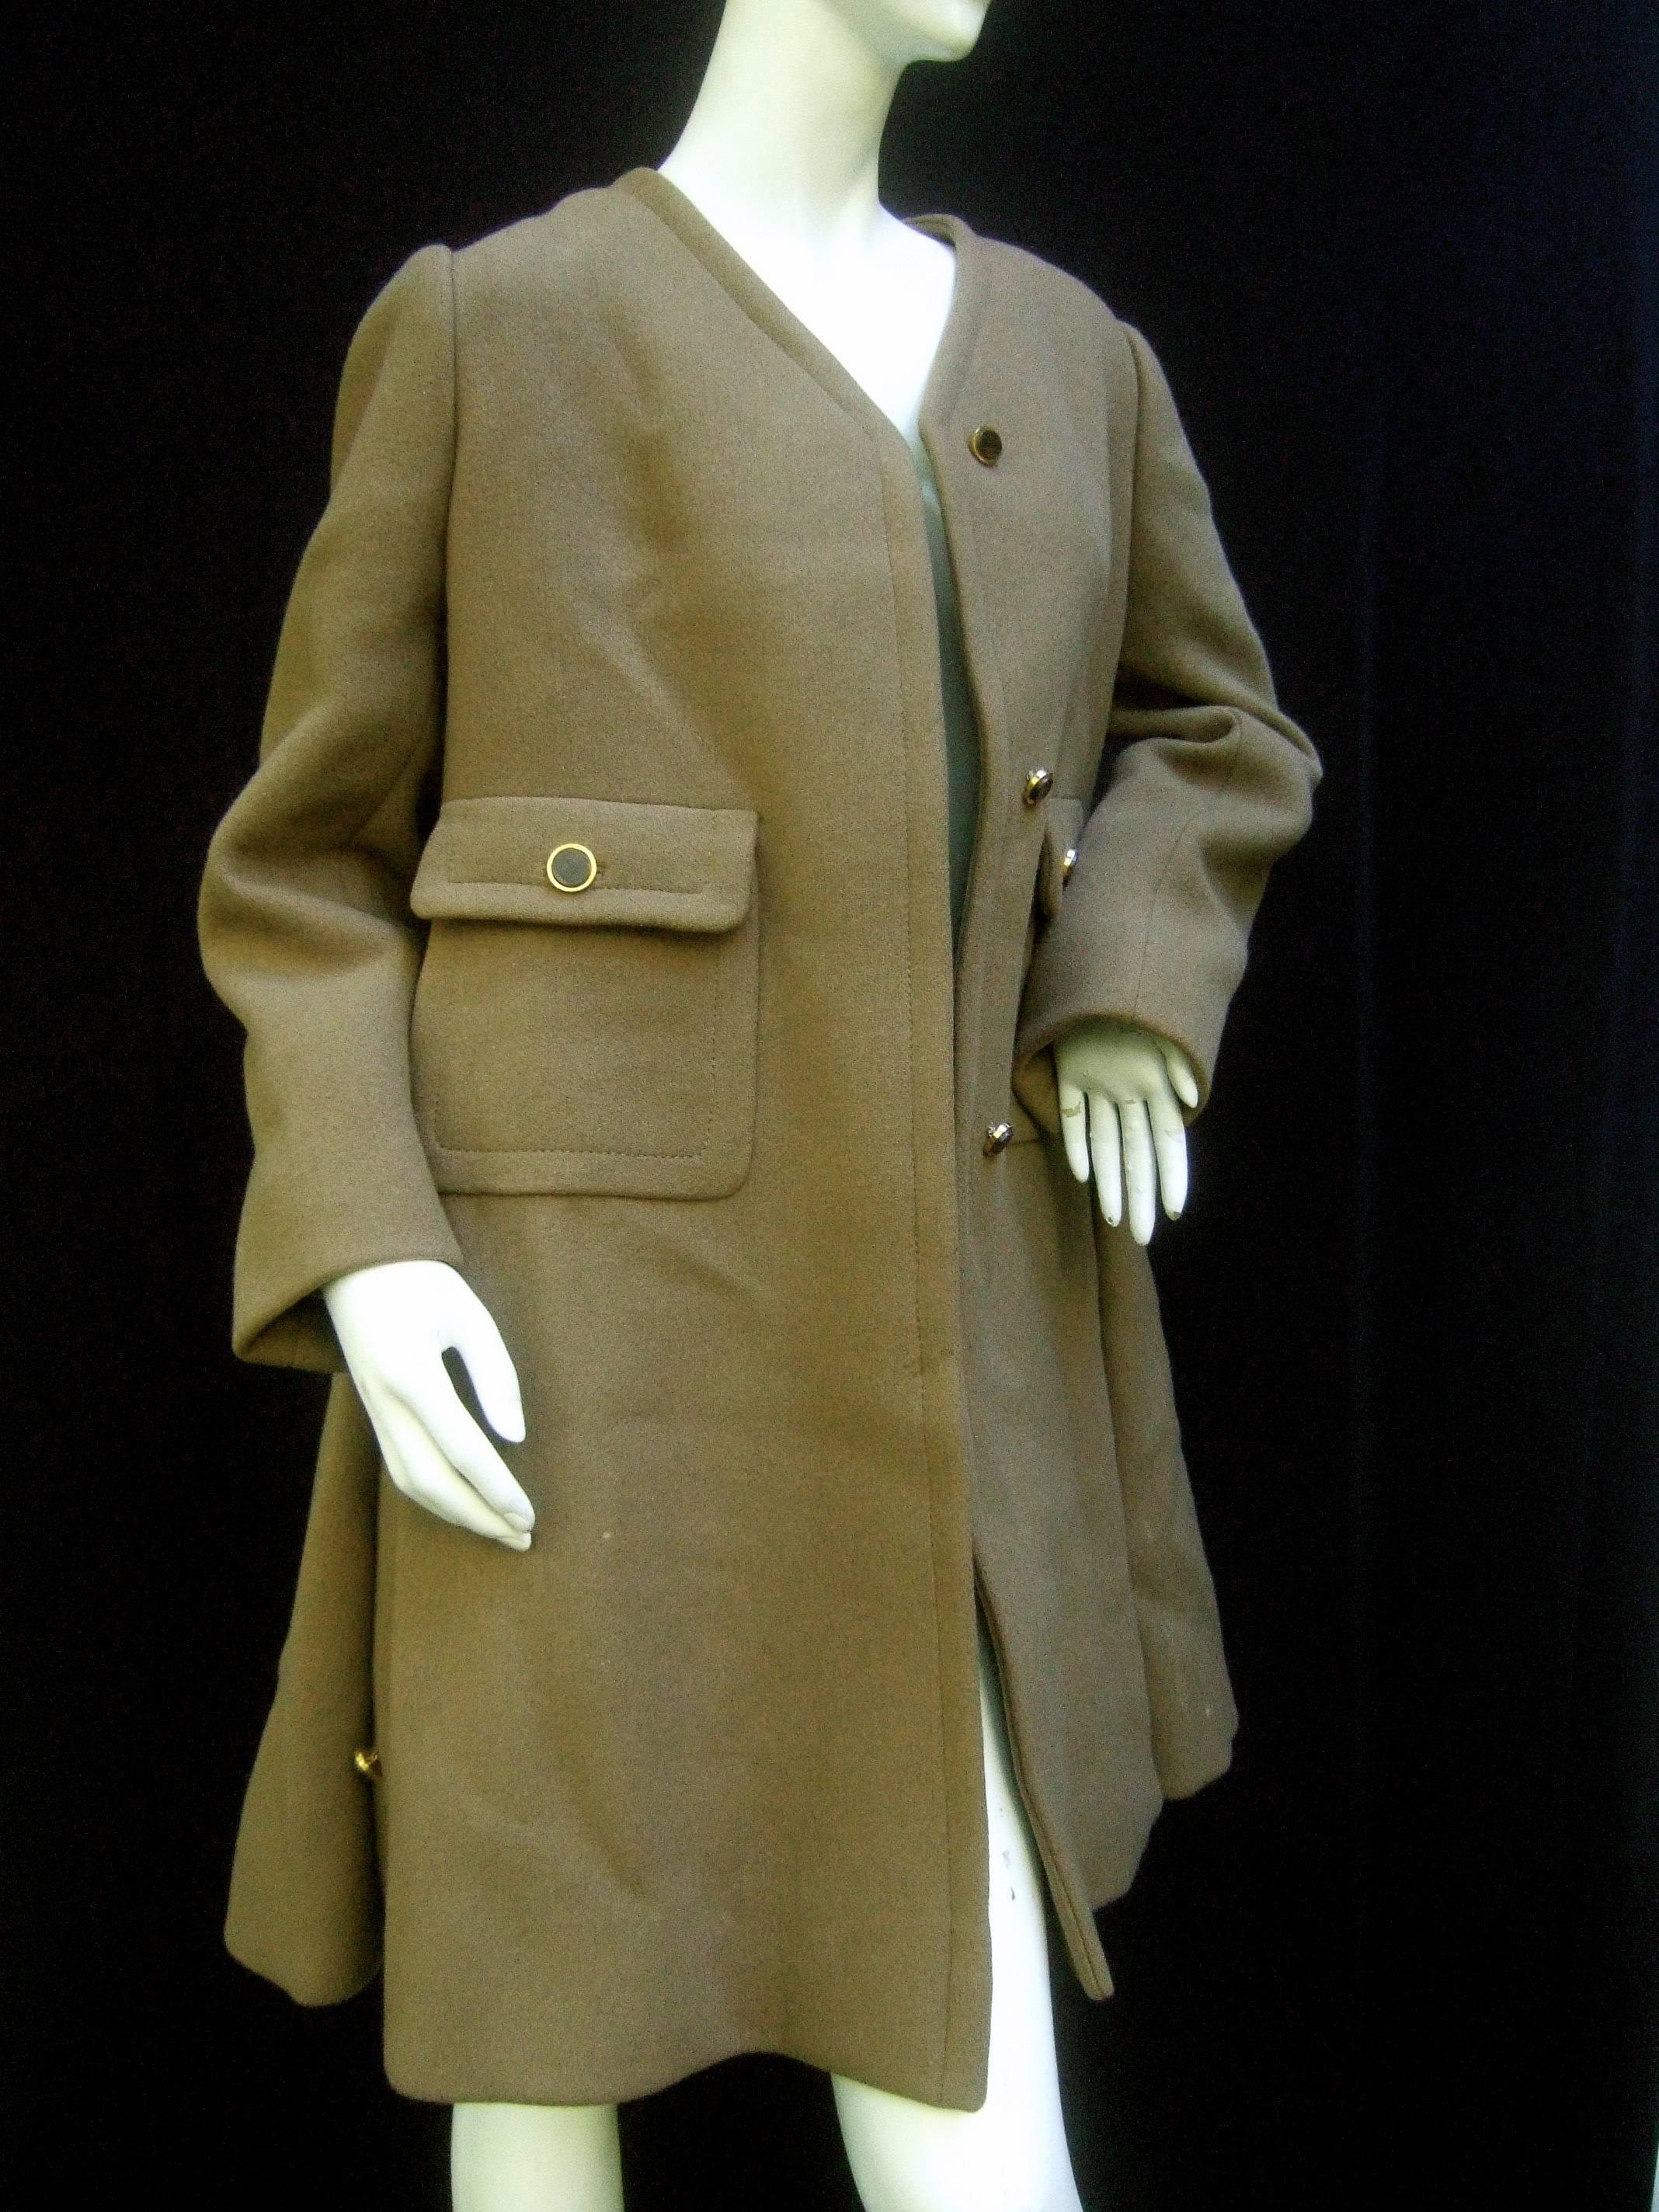 Galanos mocha brown wool winter coat c 1970
The stylish heavy gauge wool coat is designed 
in a light mocha brown shade

The chic retro coat secures with lucite tortoise
shell buttons with gilt metal bases 
The front midsection have a pair of flap